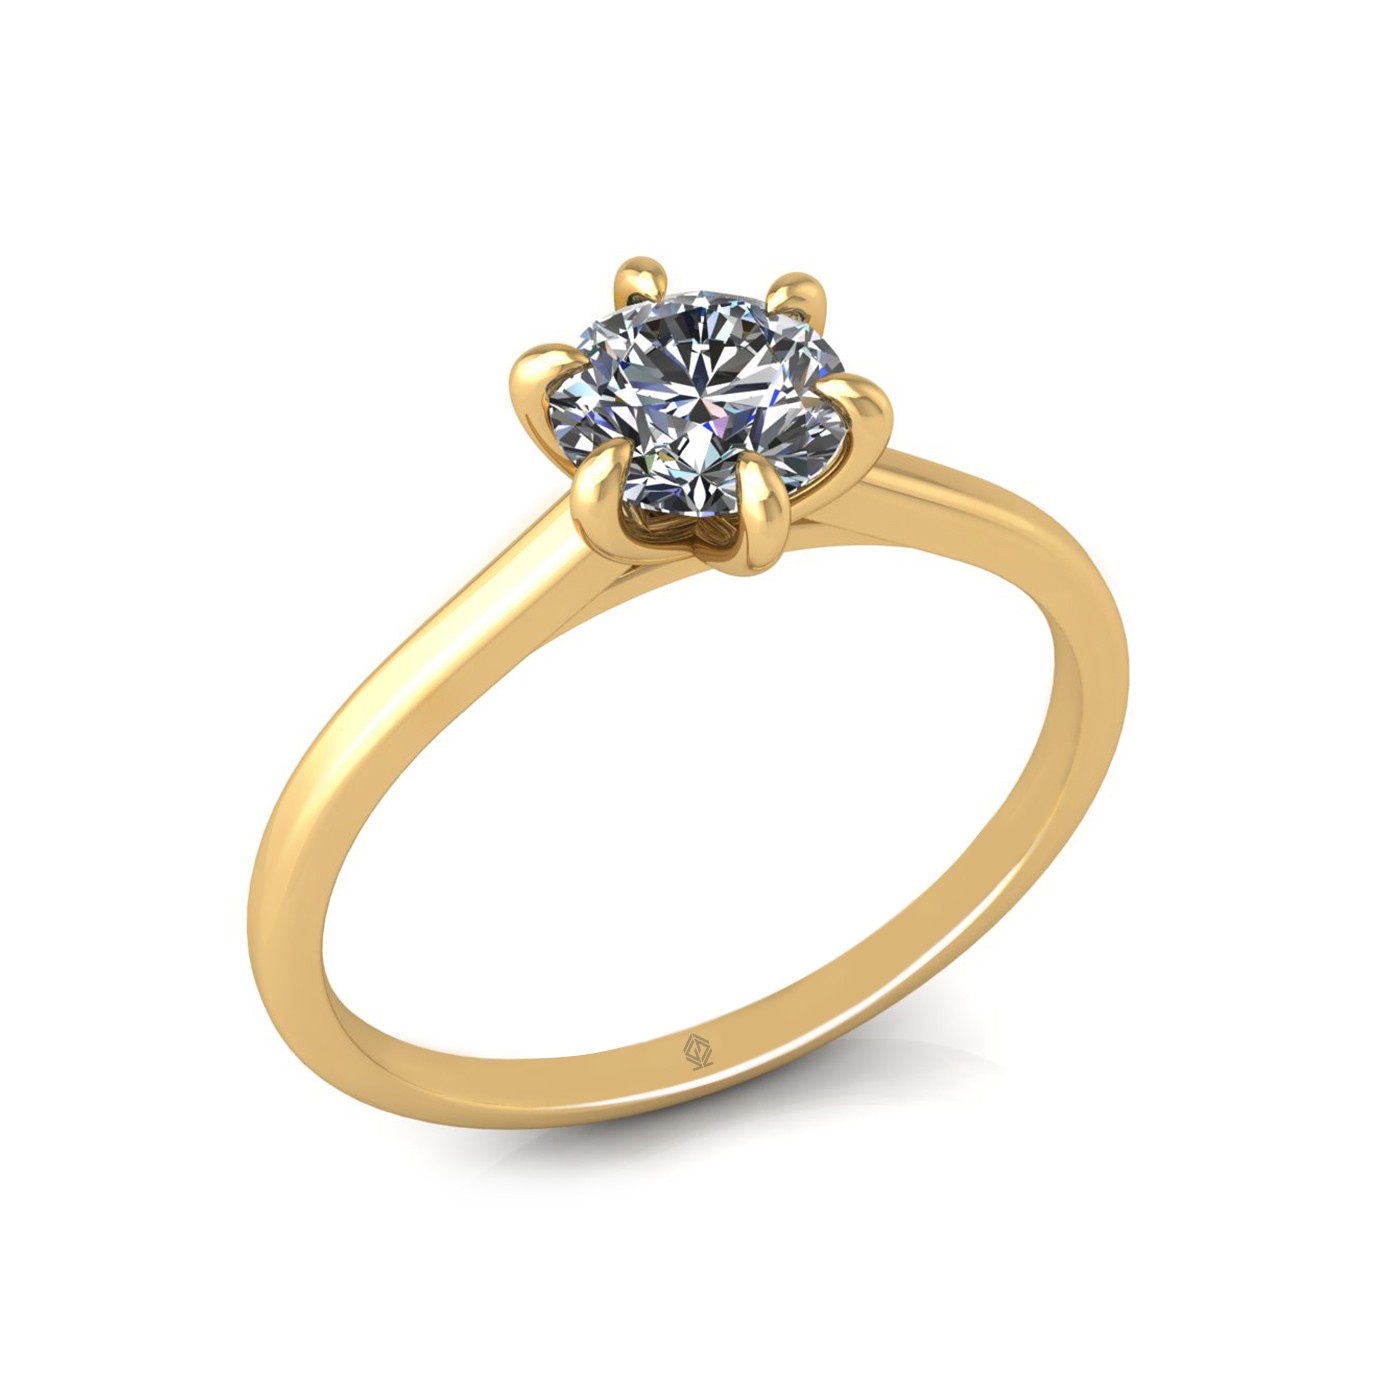 18k yellow gold 0,80 ct 6 prongs solitaire round cut diamond engagement ring with whisper thin band